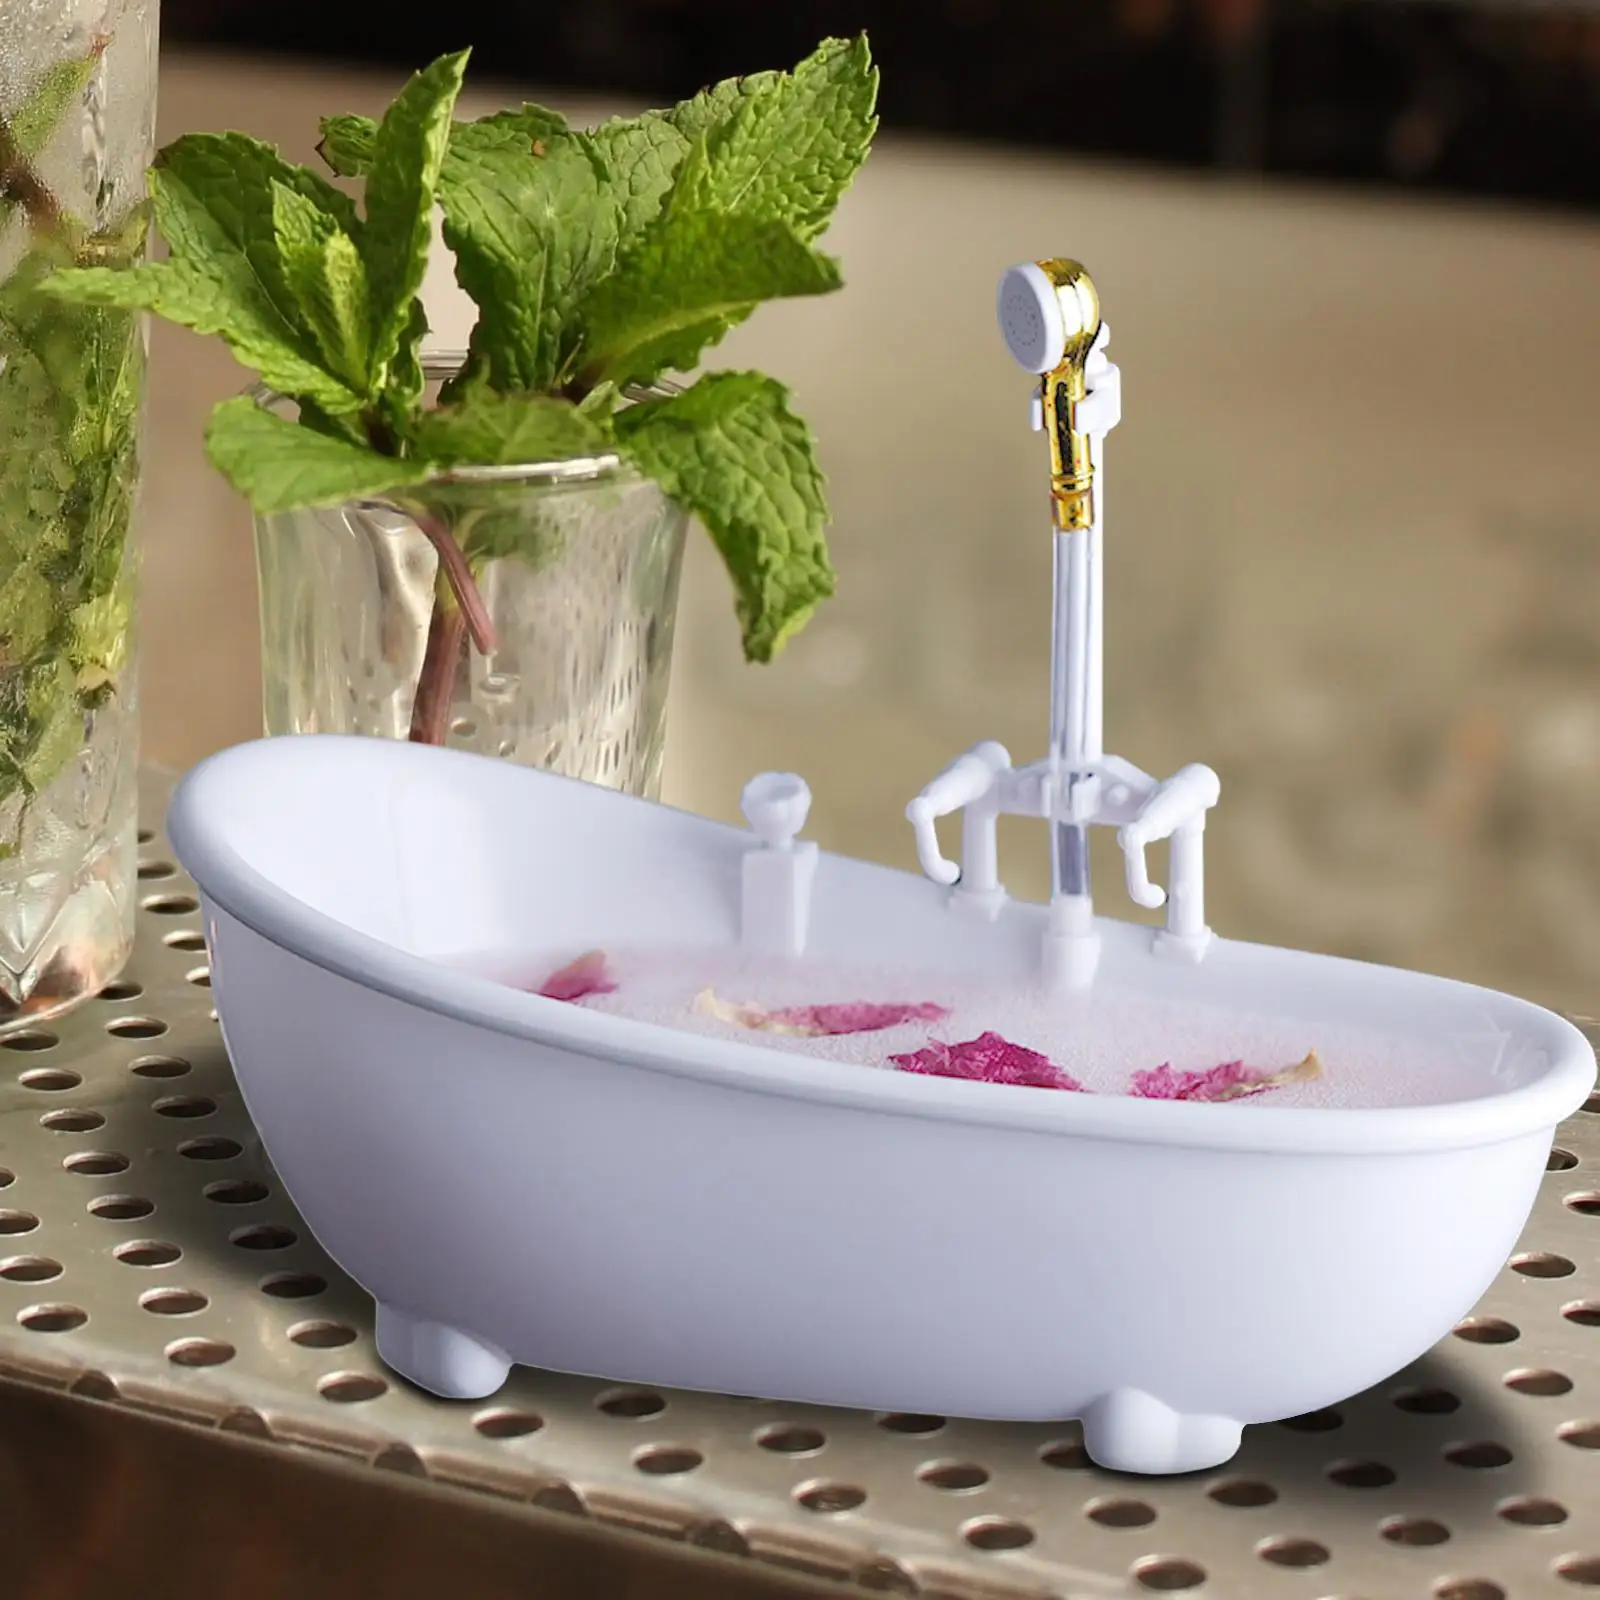 Electronic White Bathtub Sprayable Container Artistic Originality Pretend Working Sink Creative Tableware Drink Cup